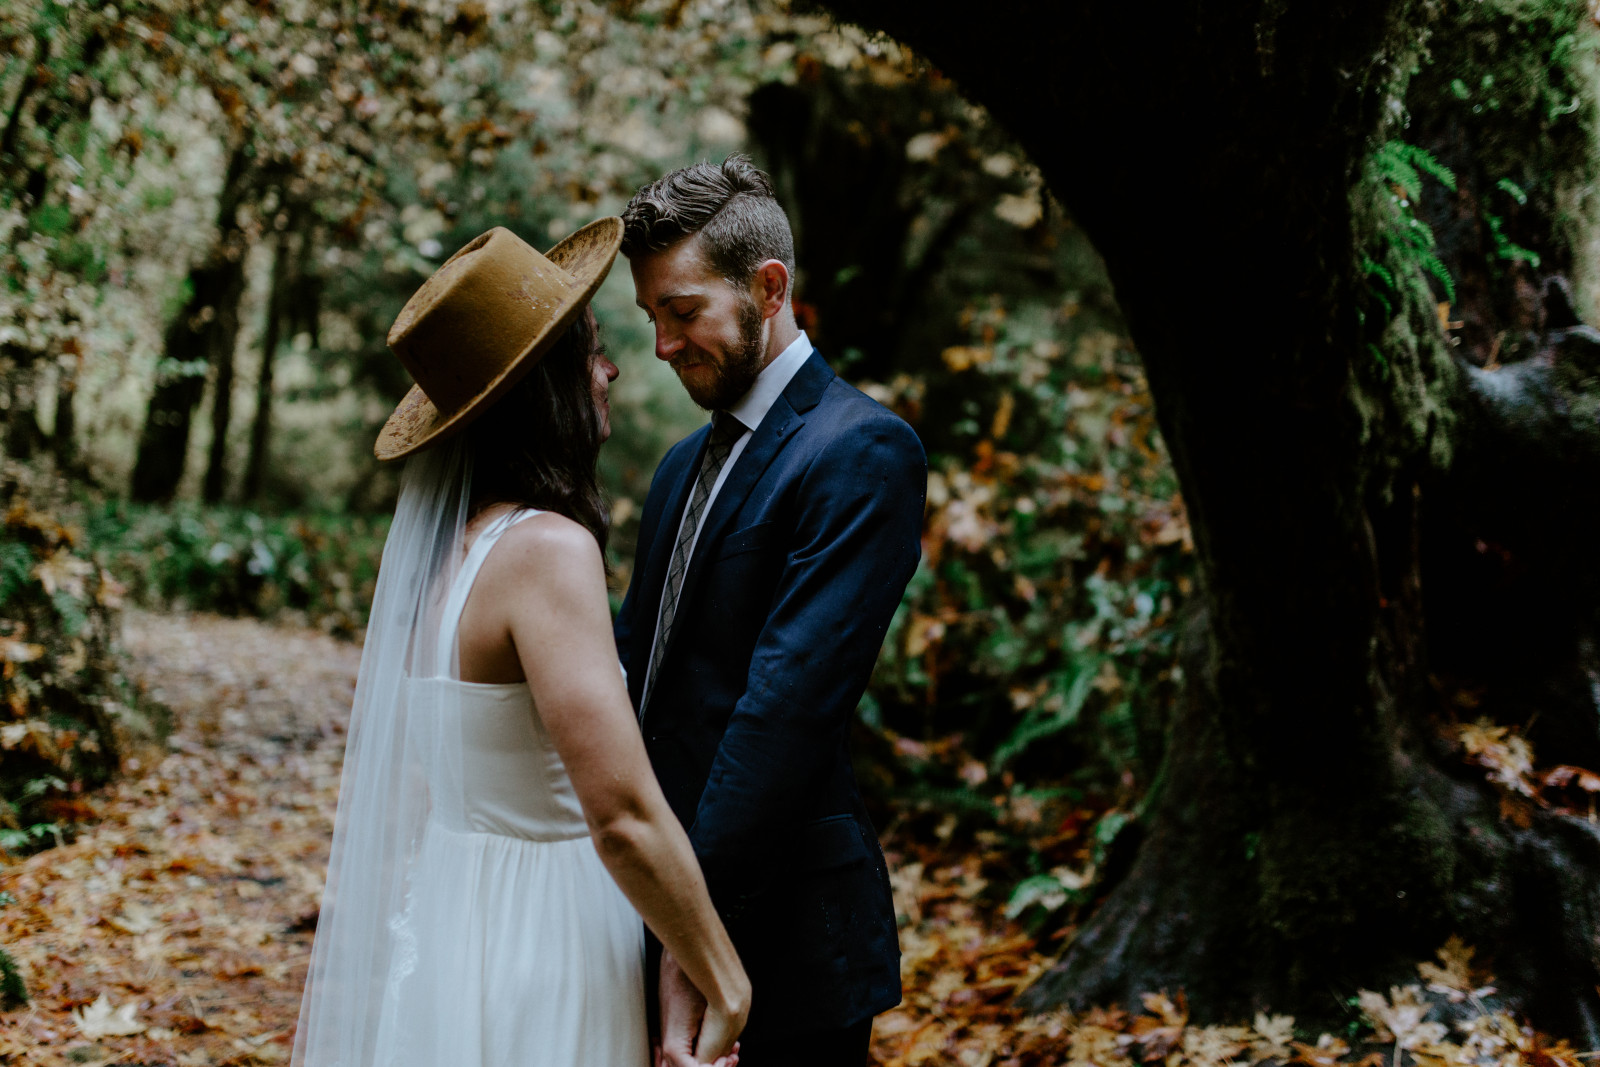 Mollie and Corey hold hands. Elopement photography in the Olympic National Park by Sienna Plus Josh.